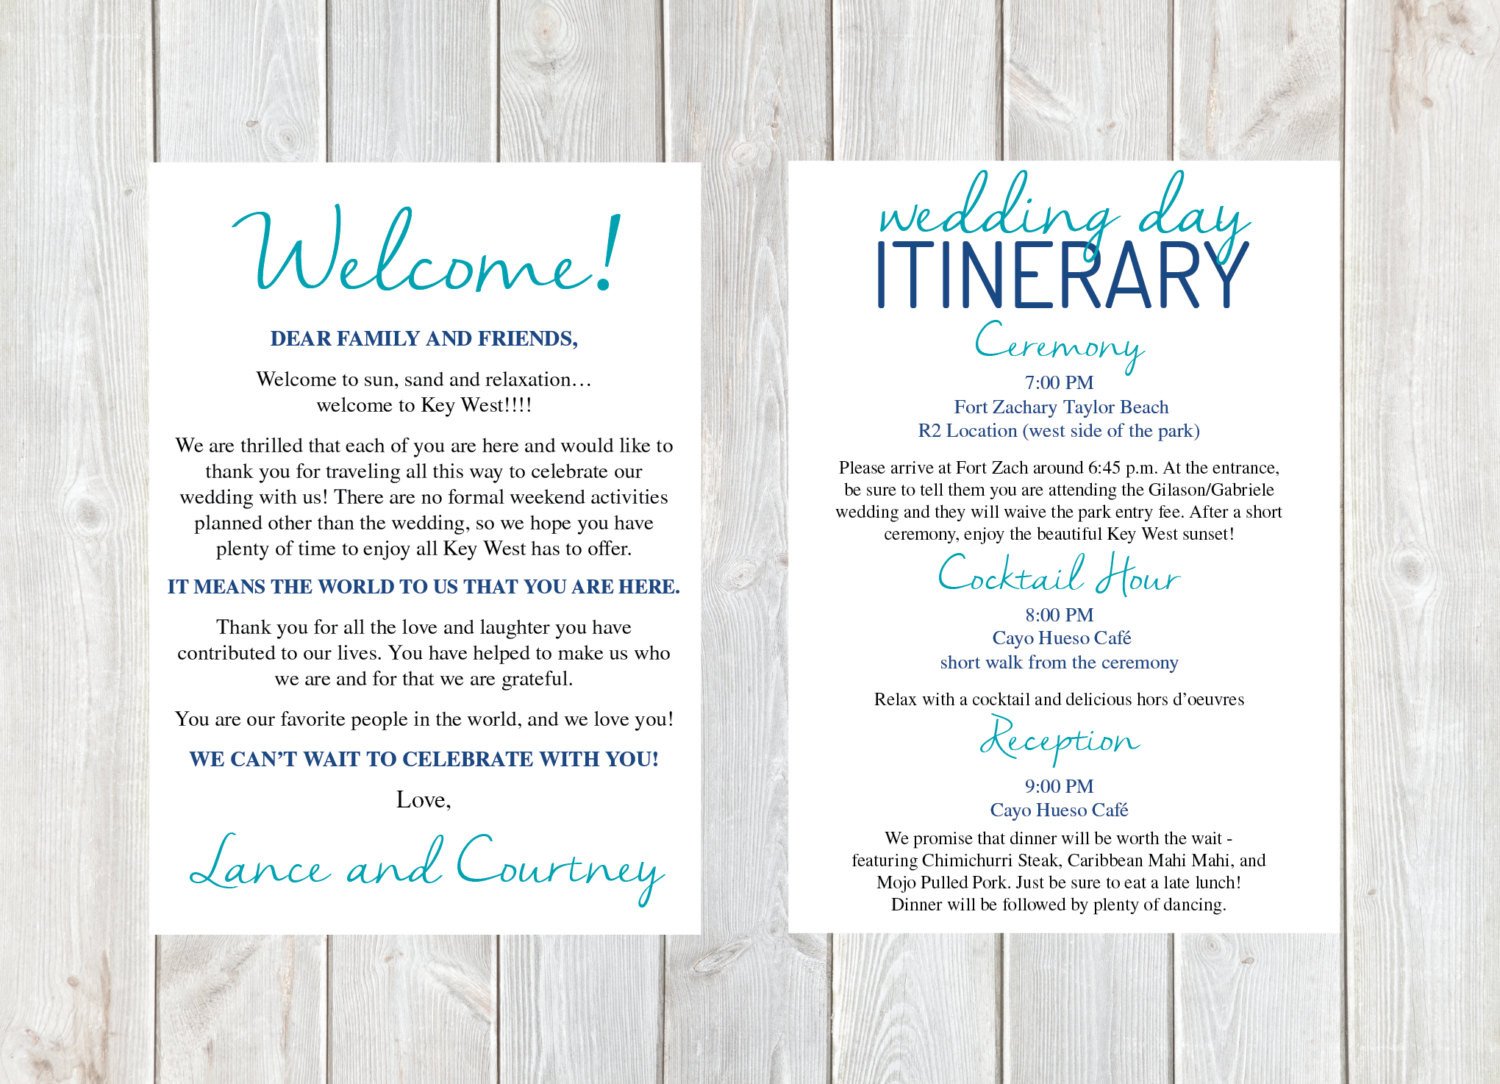 Wedding Welcome Letter Template Wel E Letter Wedding Wel E Letter Wedding Itinerary